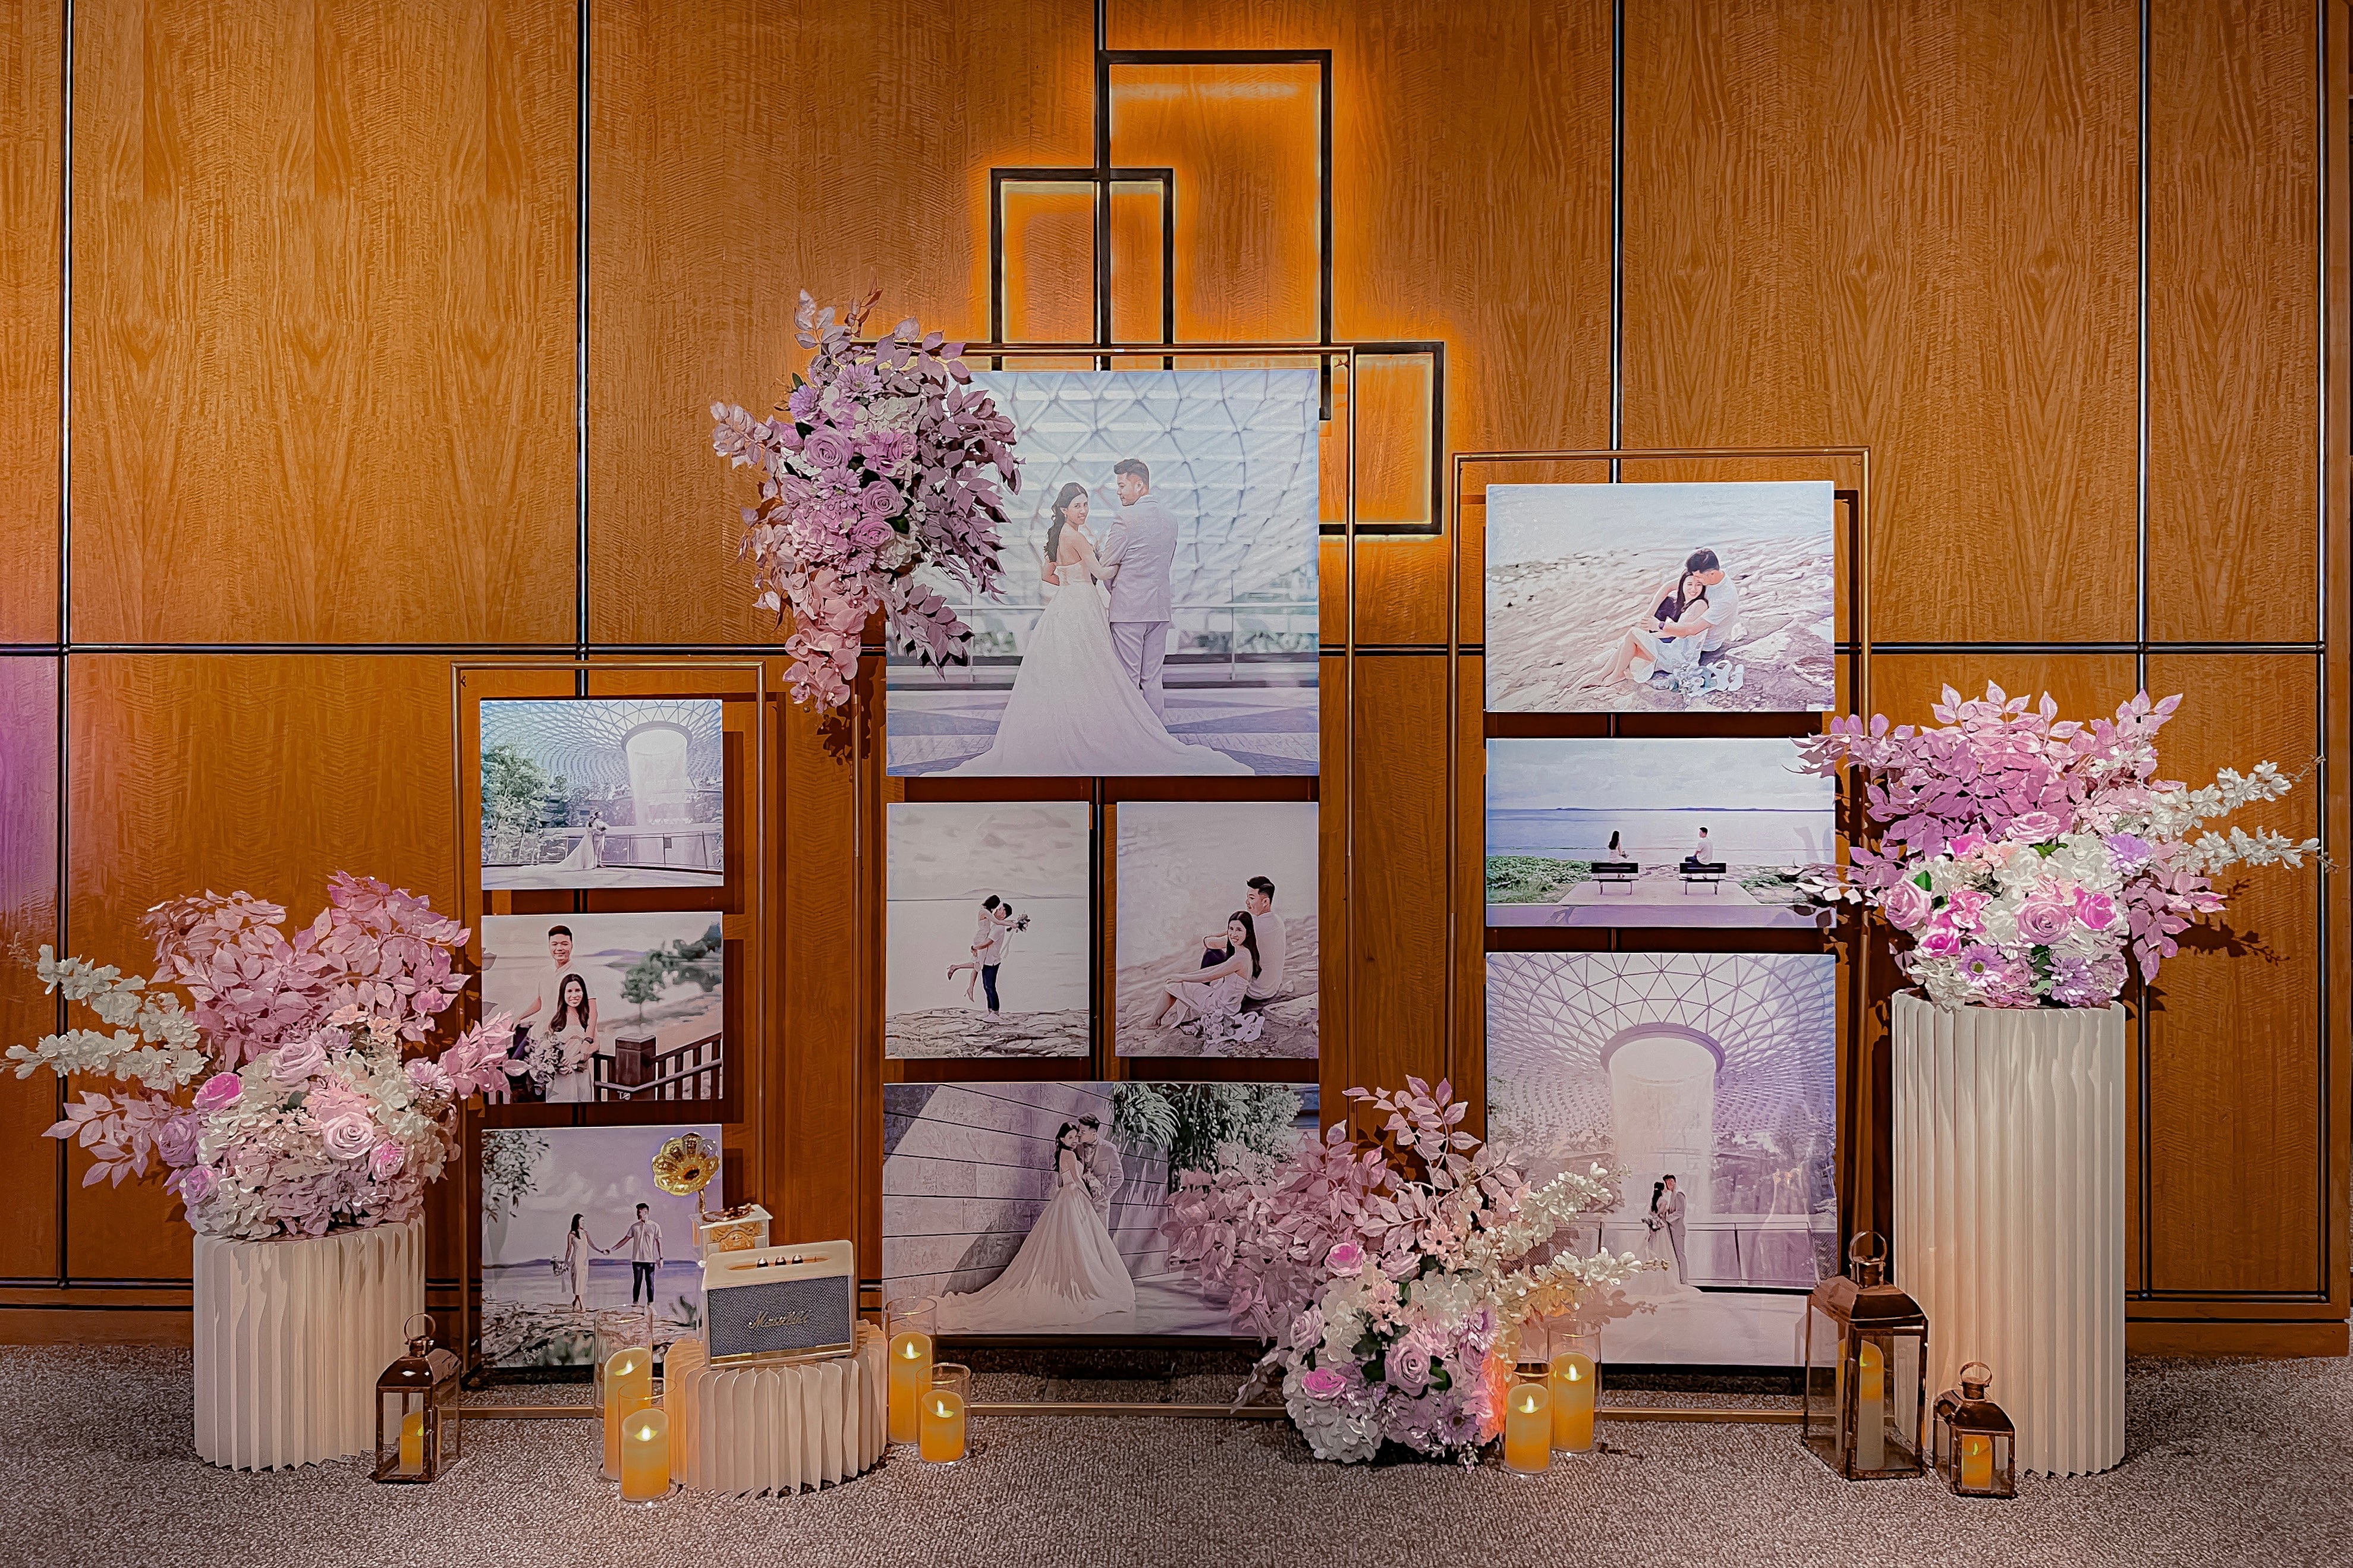 Wedding Reception Decor in Singapore - Multi-stands Photo Gallery with Purple/Lilac White Florals (Venue: Marriot Tang Plaza Hotel Grand Ballroom)